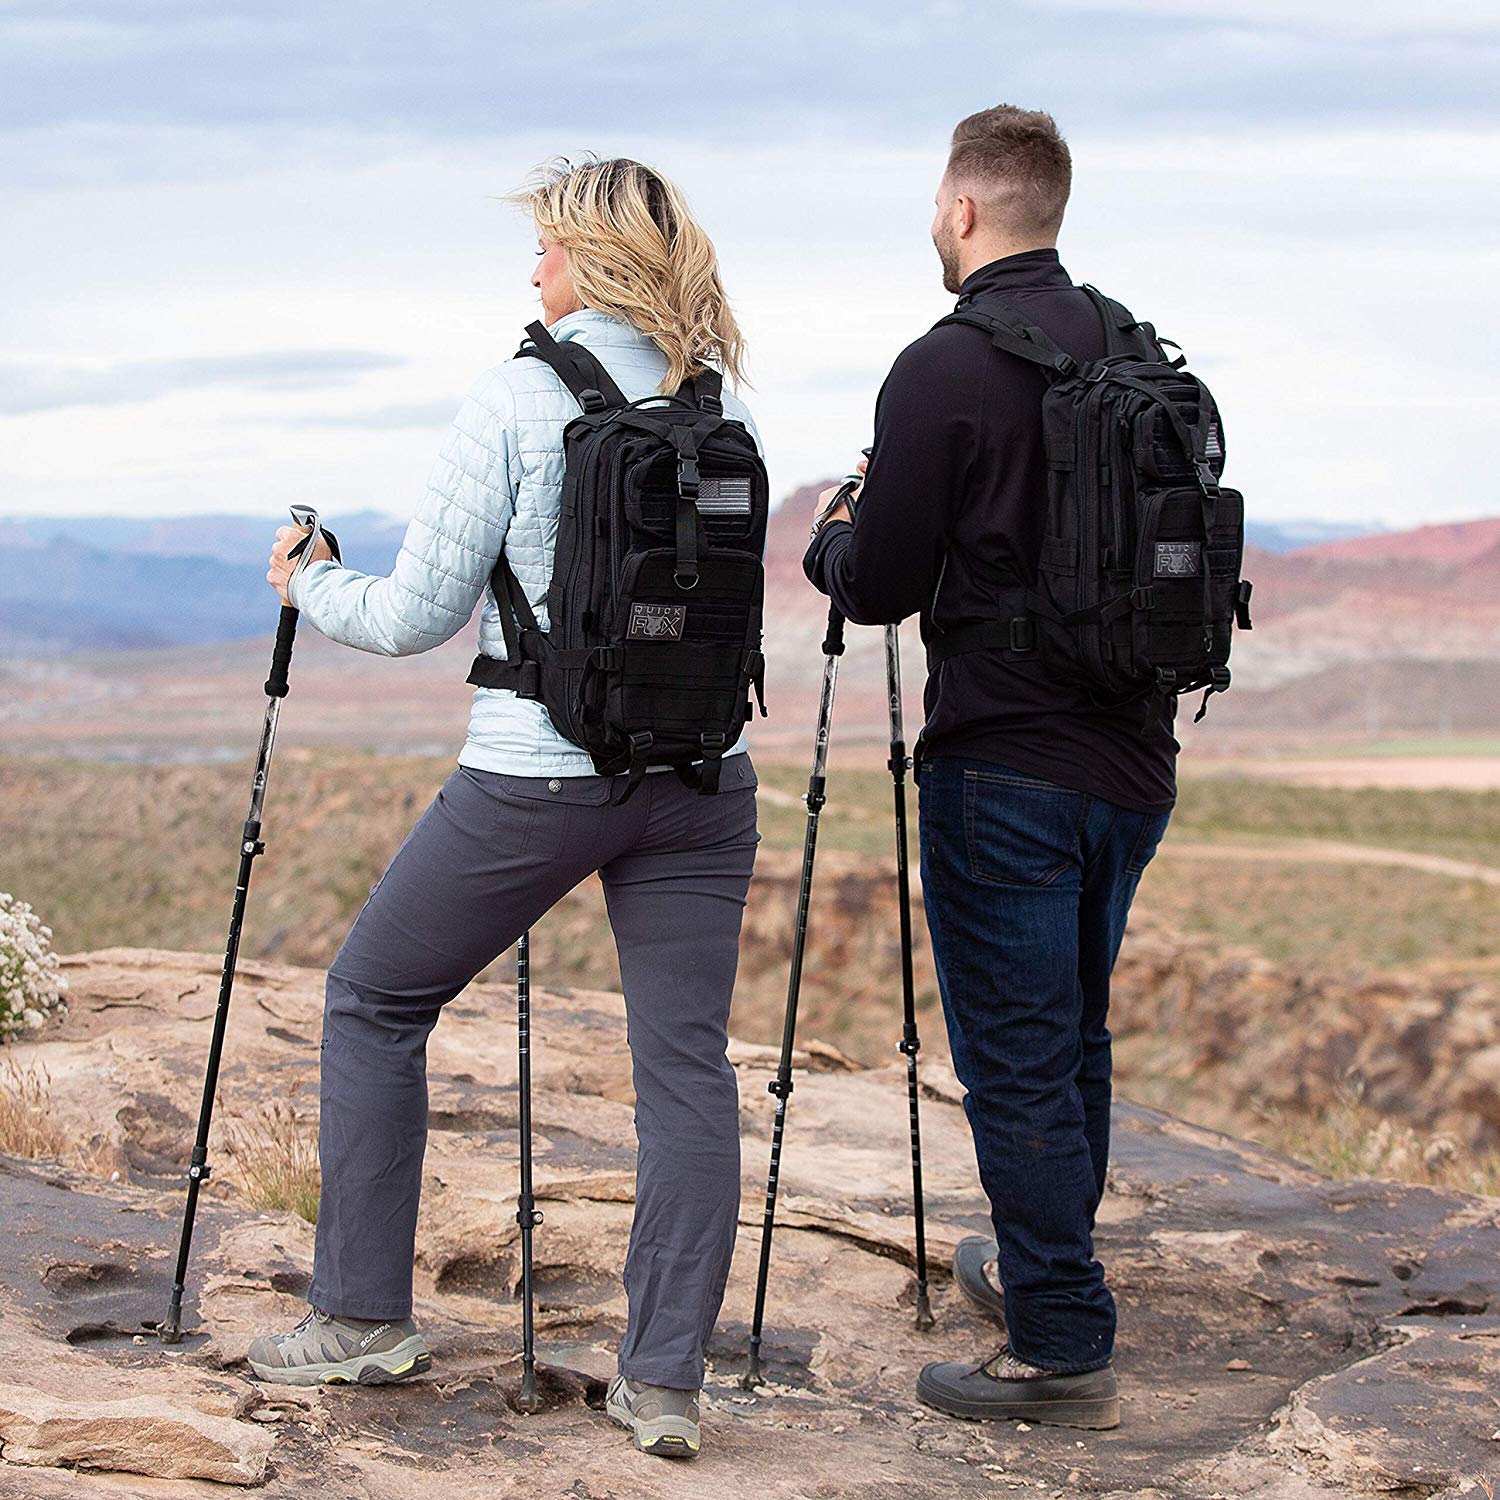 Alpine Summit Hiking/Trekking Poles with Quick Locks, Walking Sticks with Strong and Lightweight 7075 Aluminum and Cork Grips - Enjoy The Great Outdoors - image 2 of 7